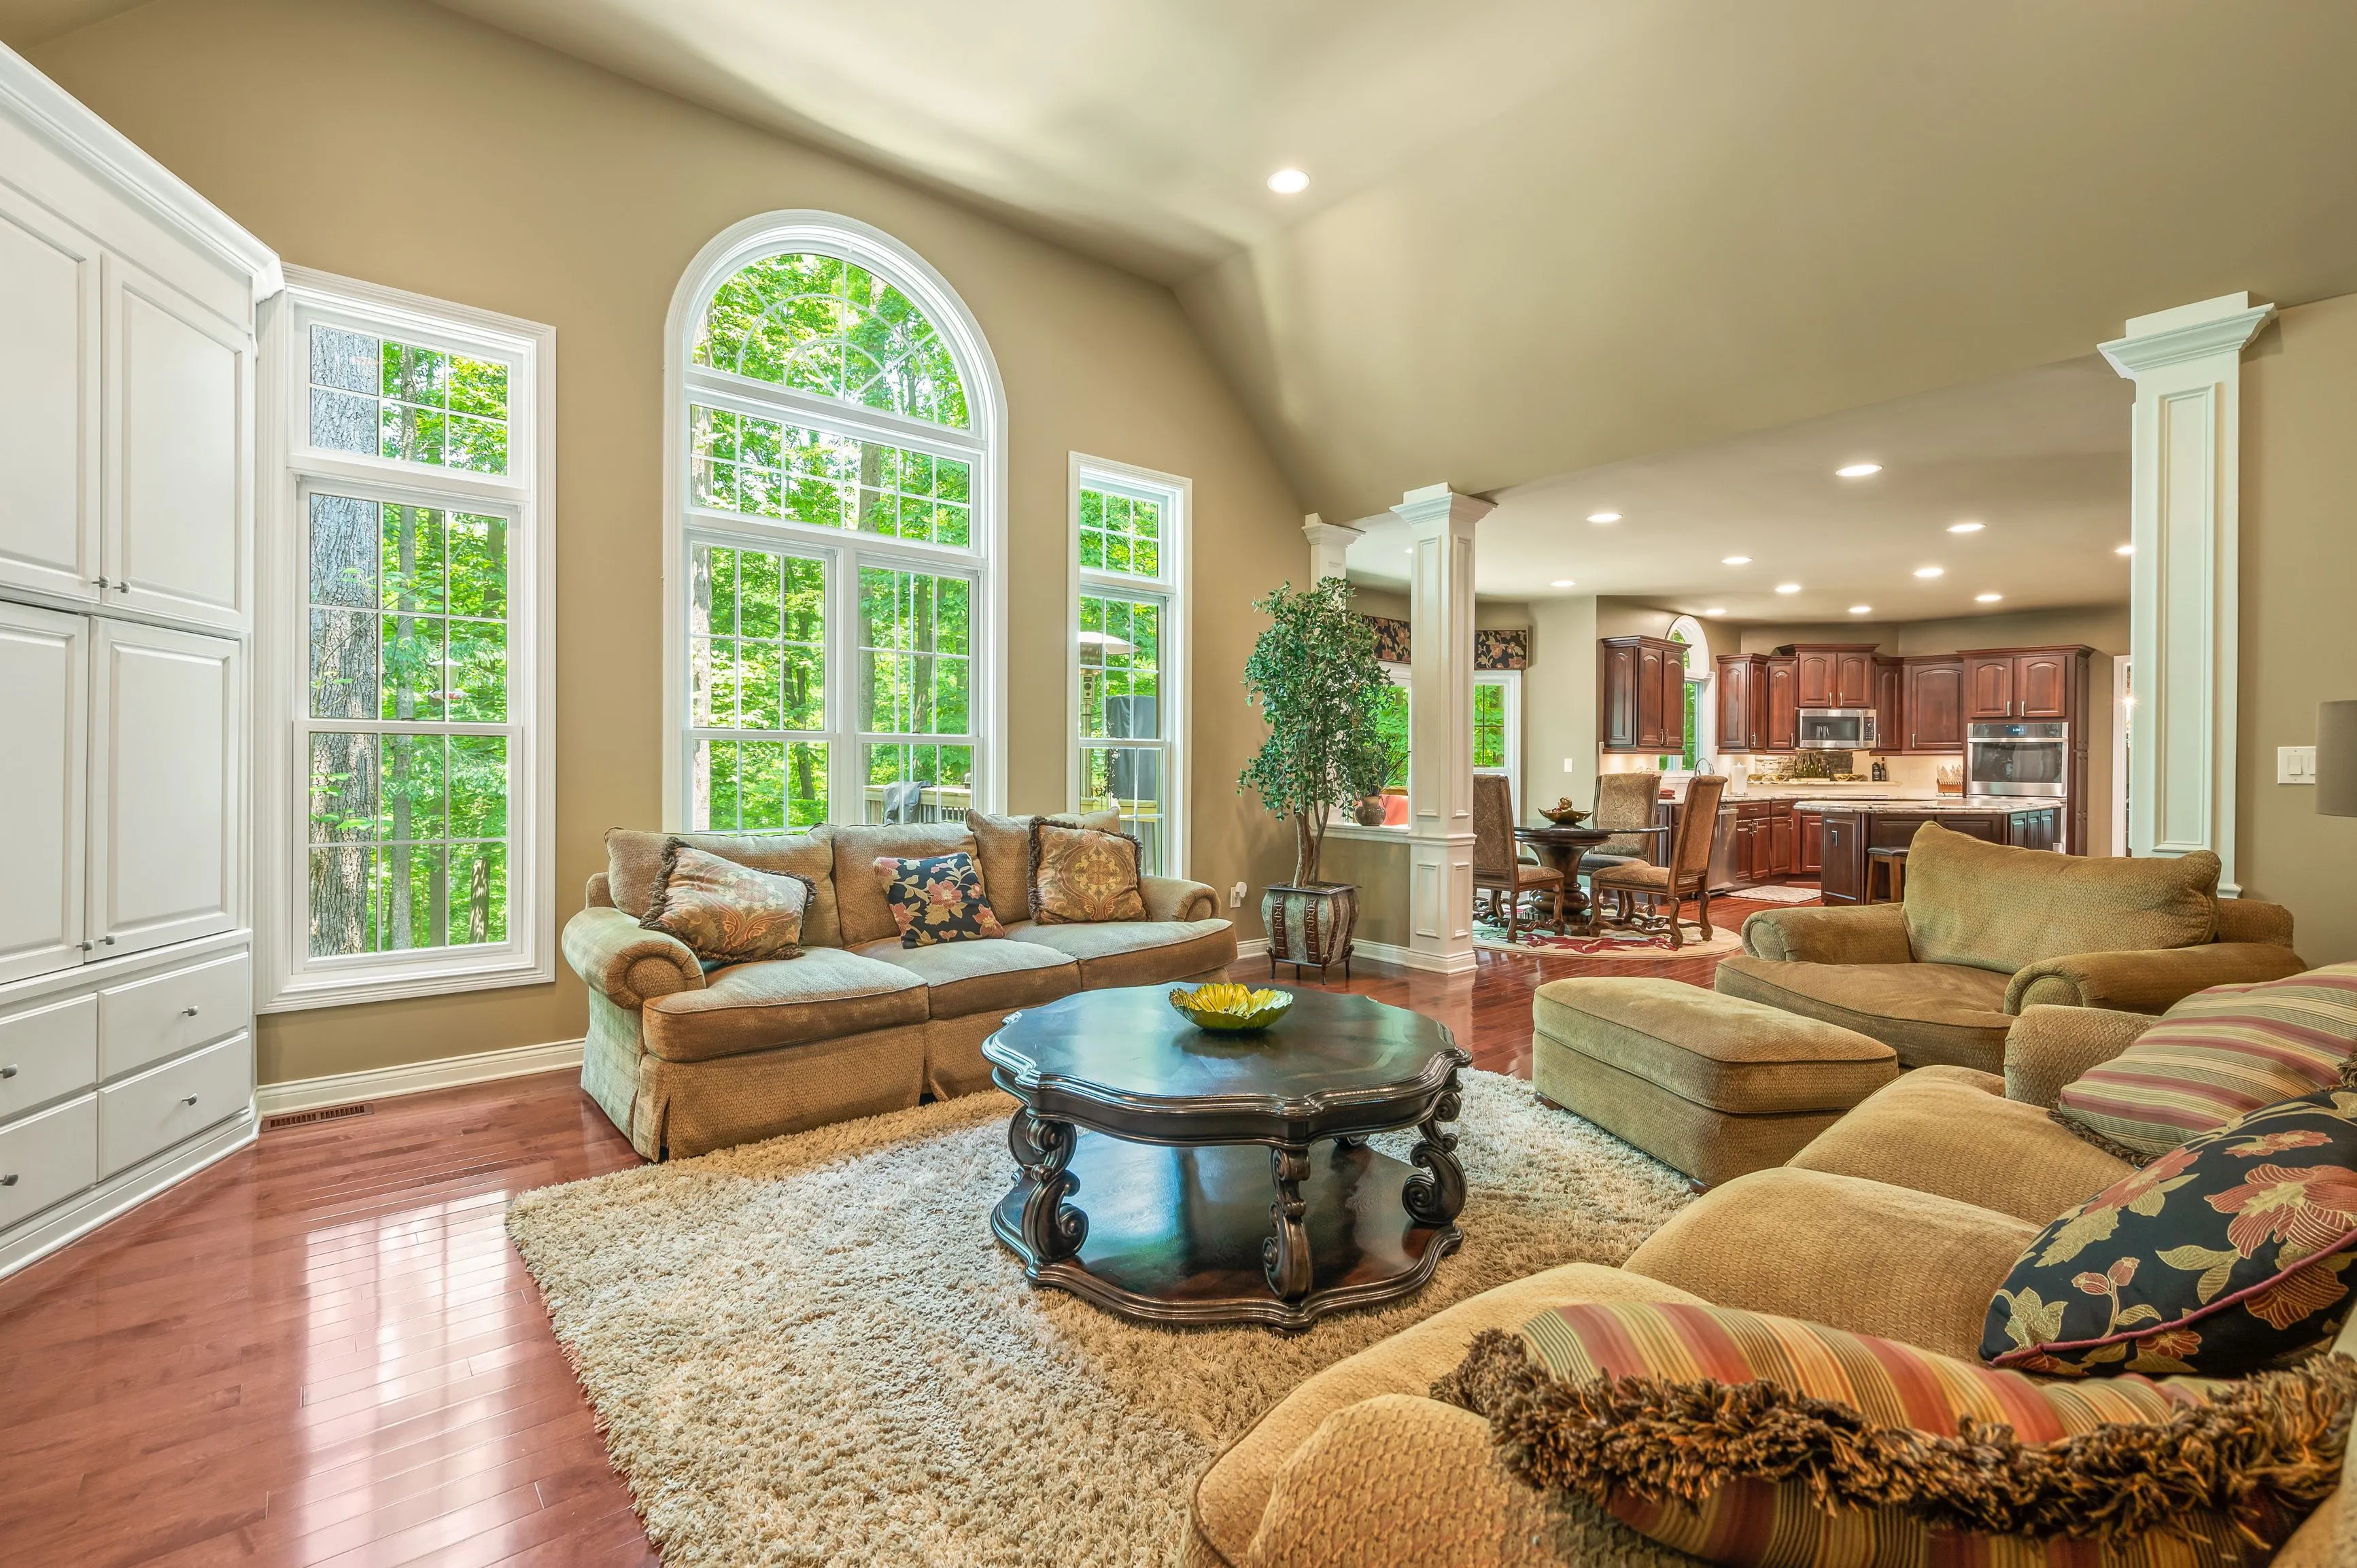 Elegant living room with large arched windows, tan sofas, a round coffee table, and a view into an adjoining kitchen area.